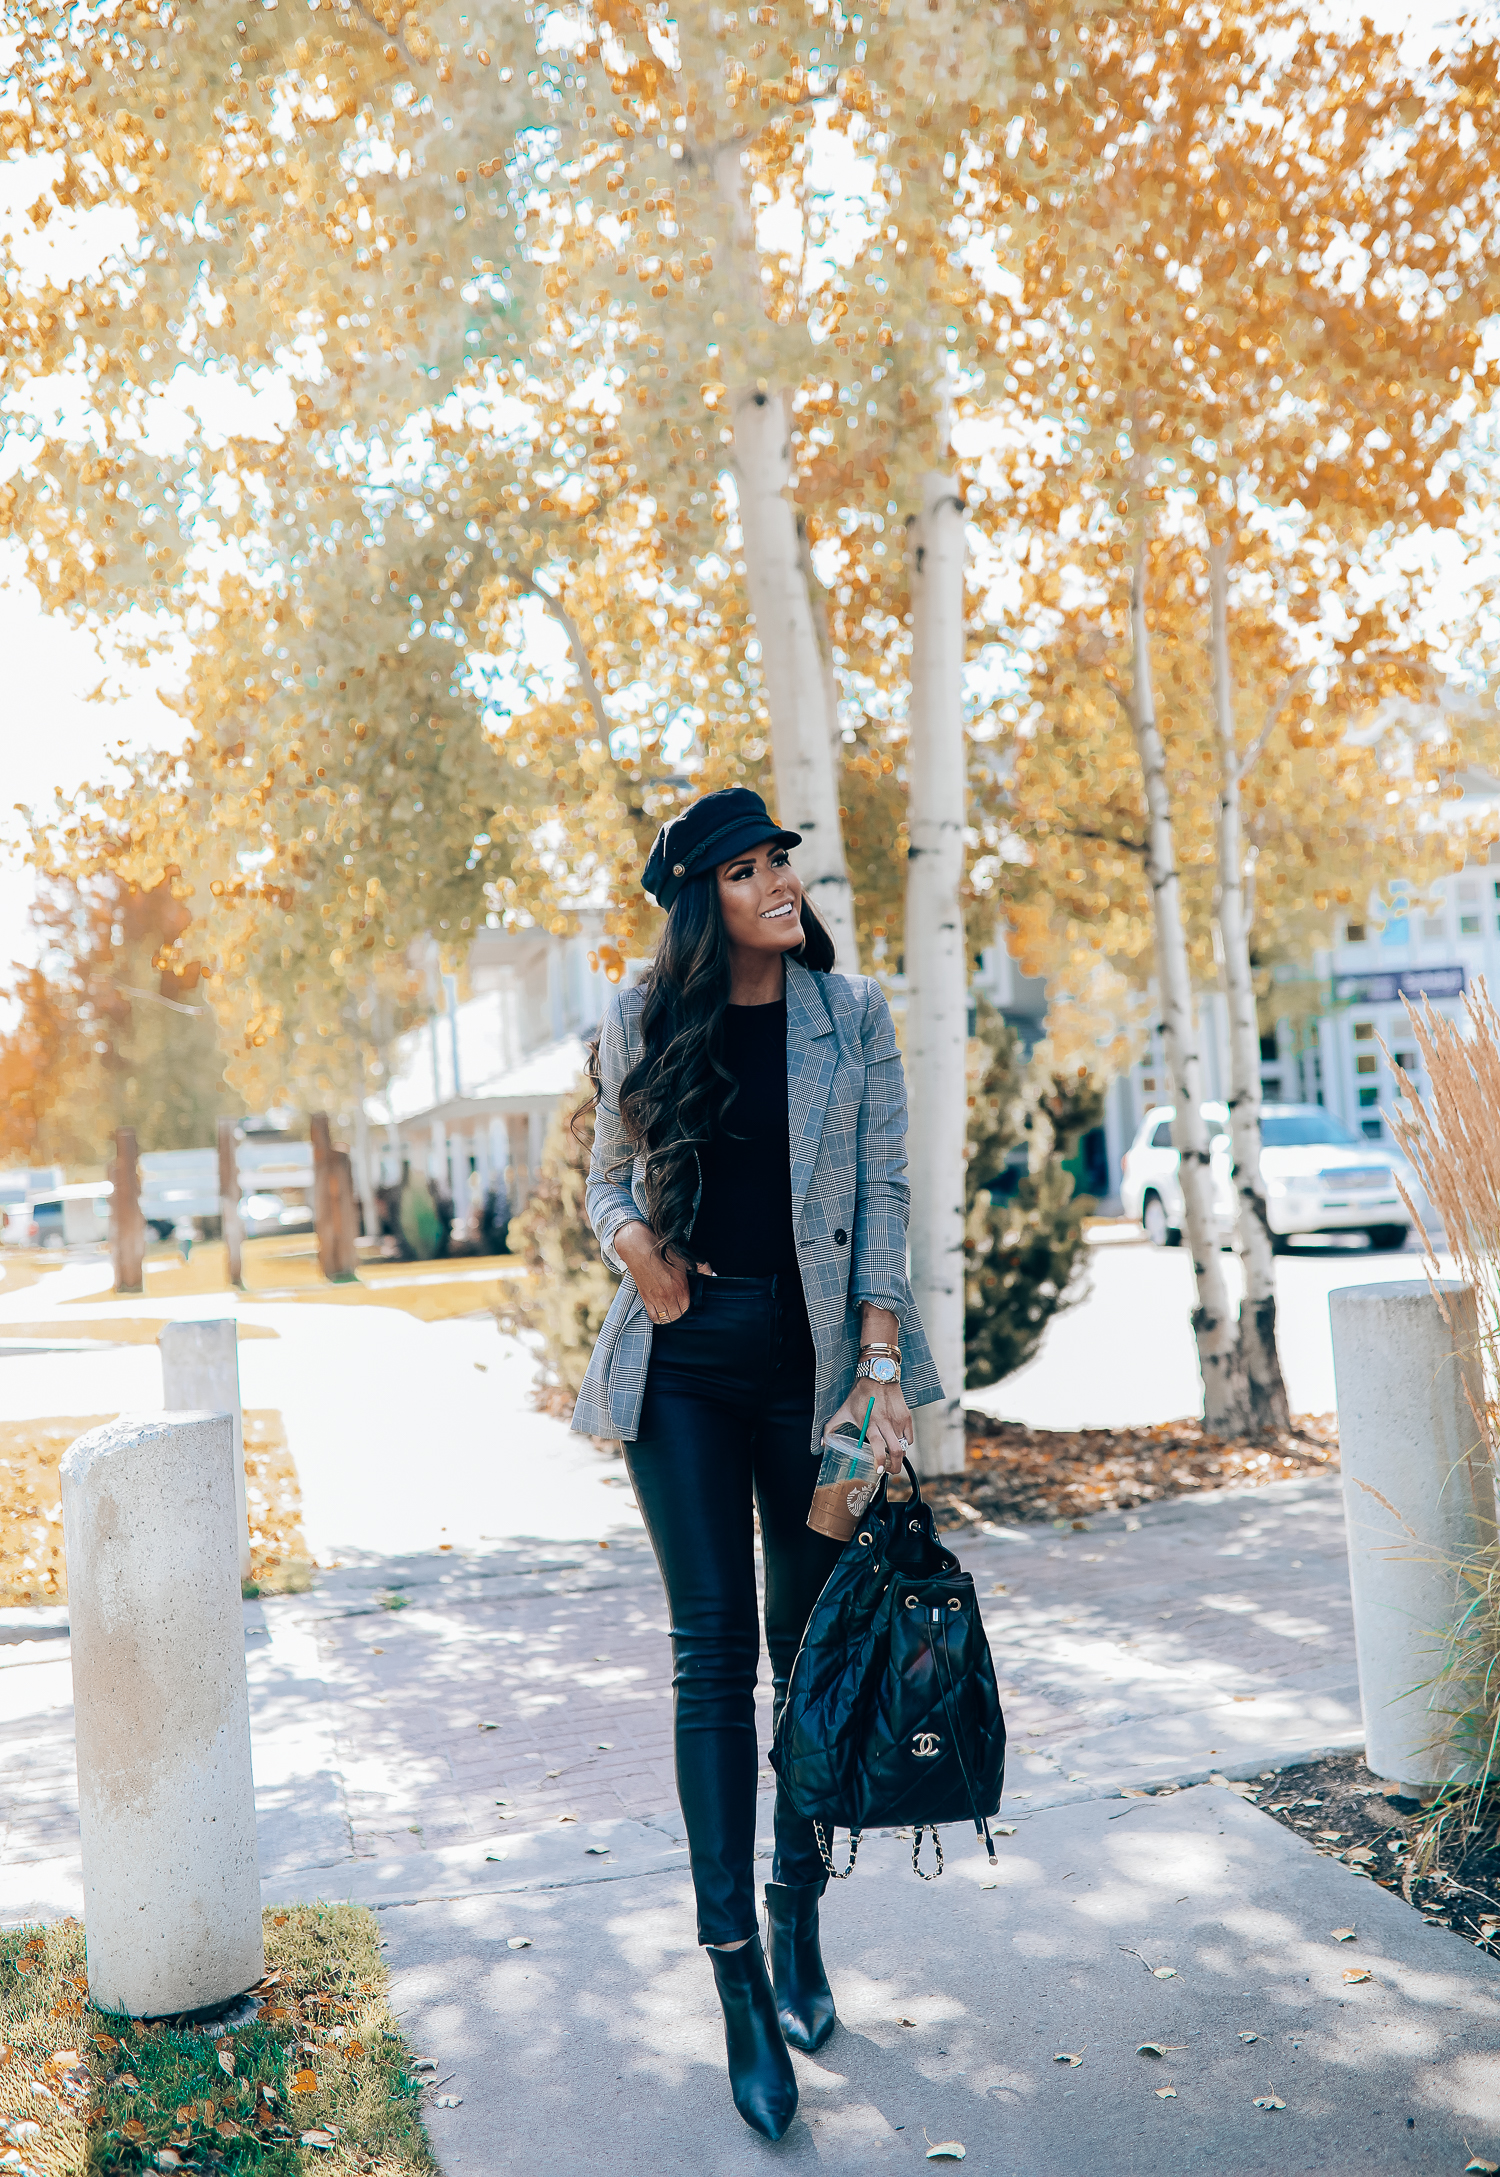 Oversized plaid blazer styled for Fall by top US fashion blog, The Sweetest Thing: image of a woman wearing an Aqua oversized plaid blazer, Splendid long sleeve top, BlankNYC vegan leggings, Marc Fisher booties, Chanel backpack, Baker boy cap, a Rolex watch, Argento Vivo earrings, and Cartier bracelets